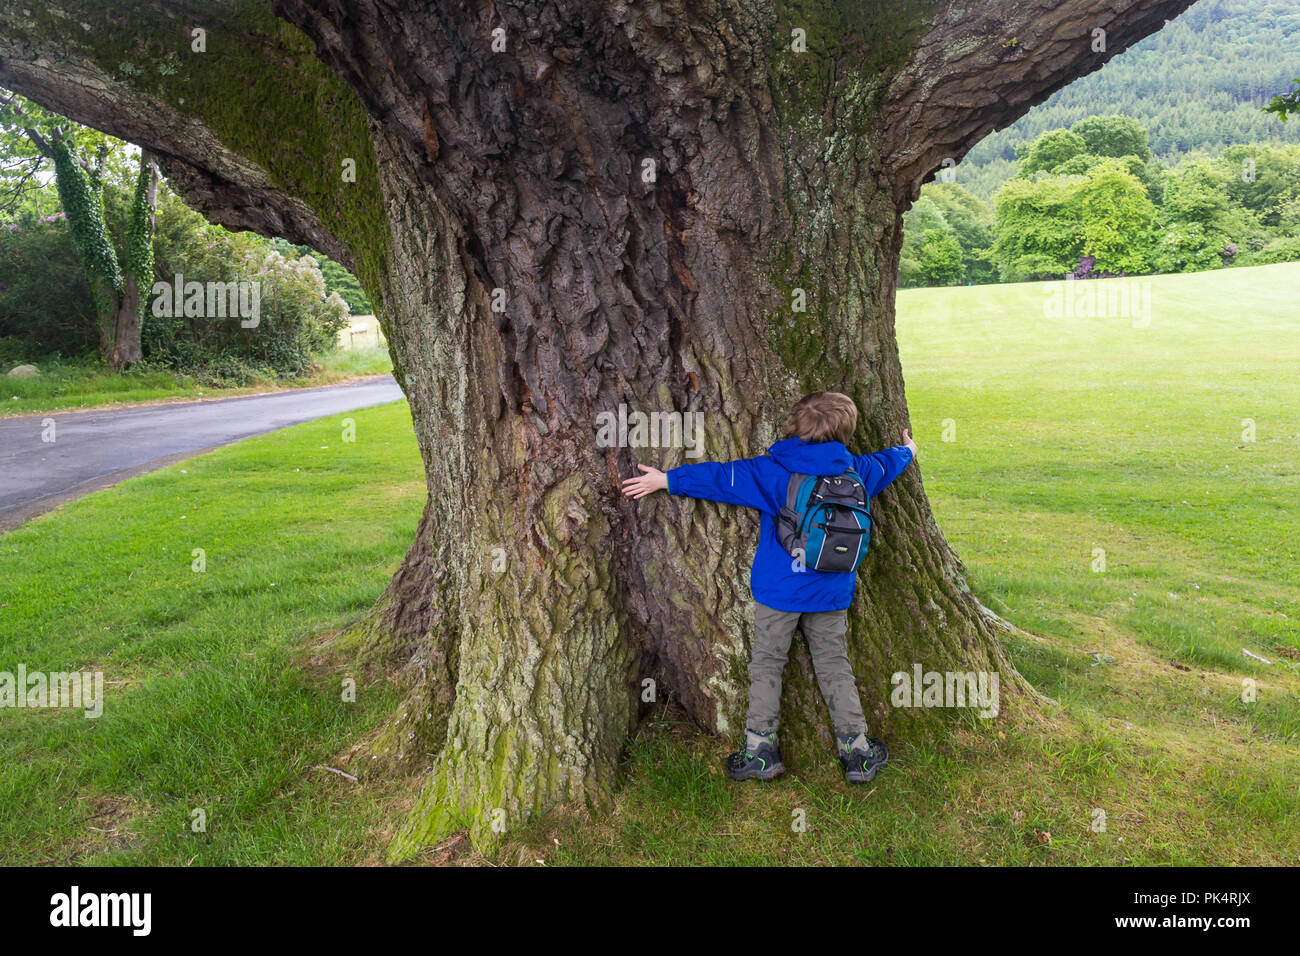 Child hugging a large wide tree trunk Stock Photo